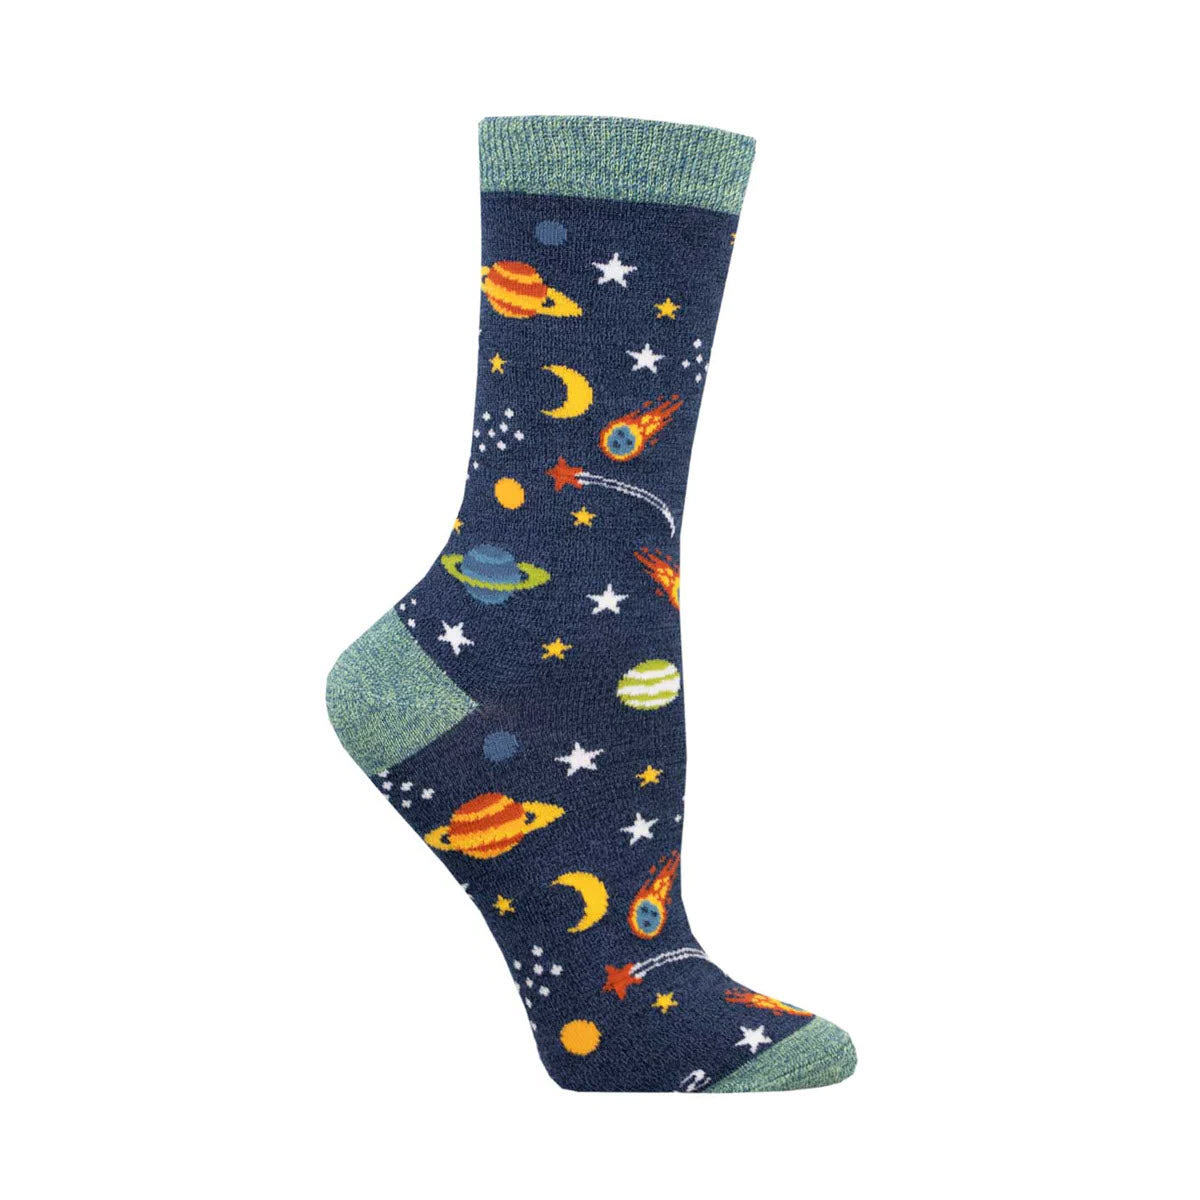 A single SOCKSMITH BAMBOO CREW SOCKS REACH FOR THE STARS NAVY - WOMENS with a colorful &quot;Reach for the Stars&quot; pattern, featuring planets, stars, and rockets on a dark blue background.